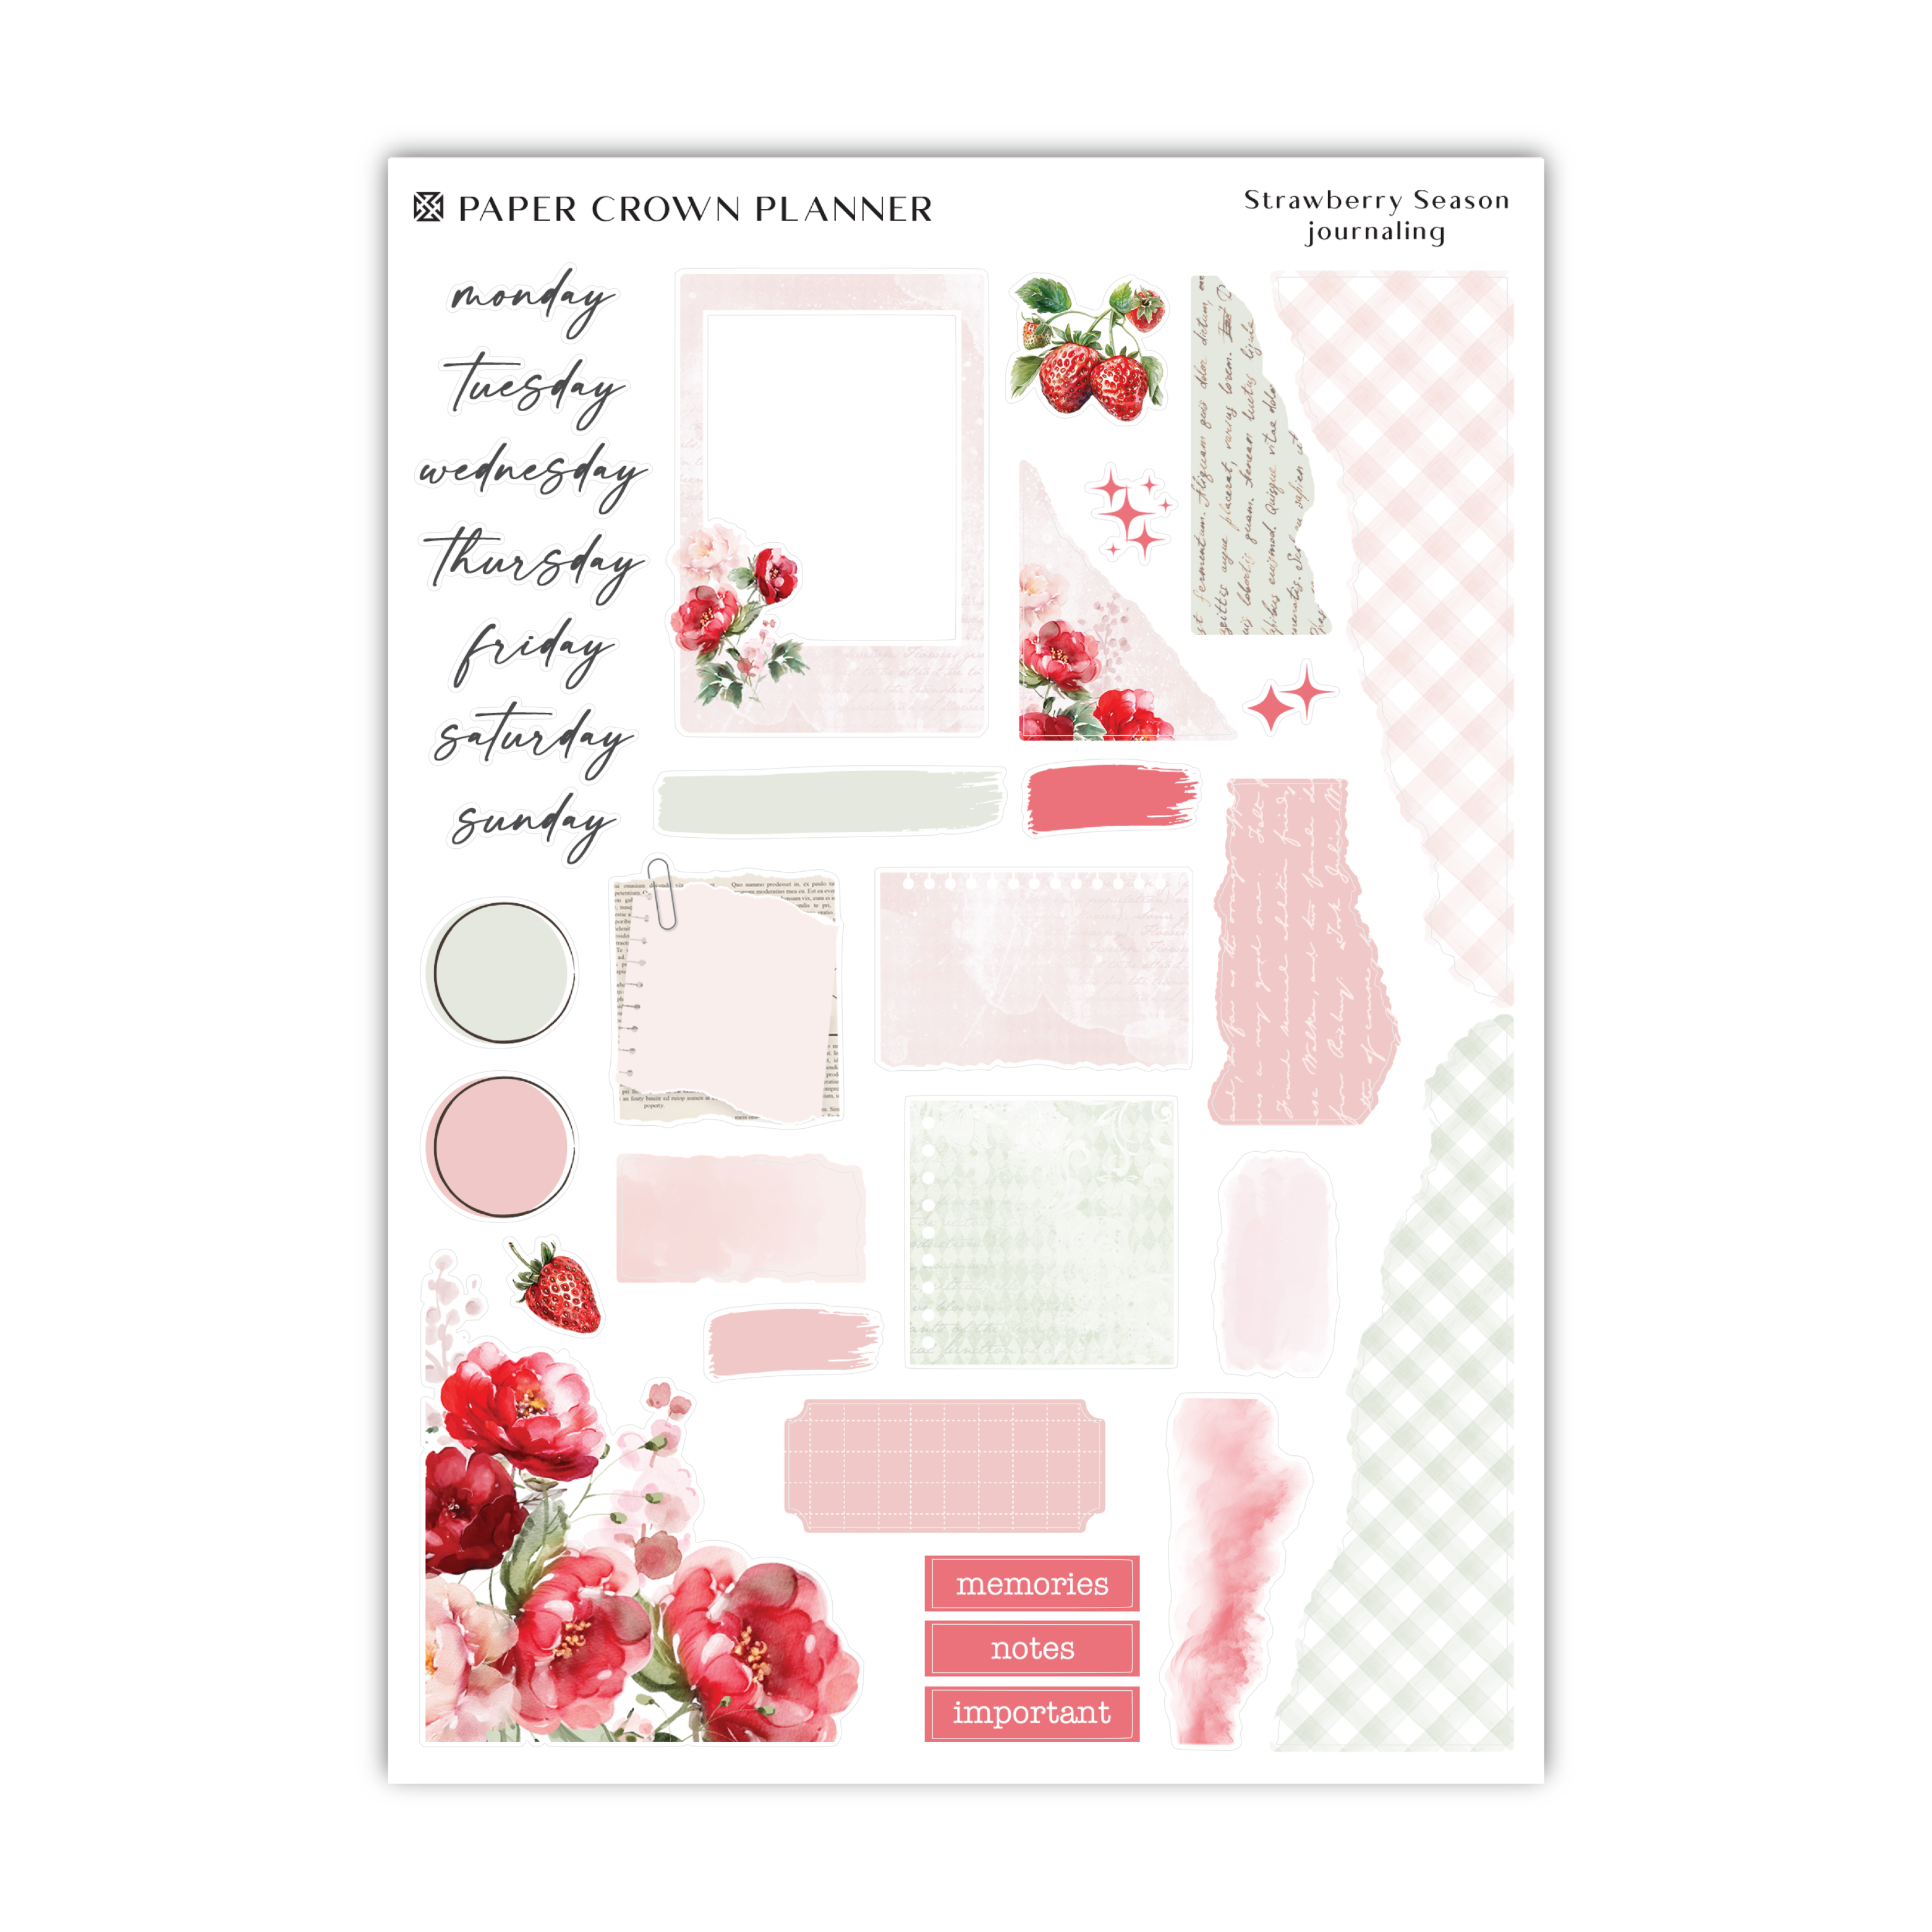 a paper crown planner with flowers and pinks